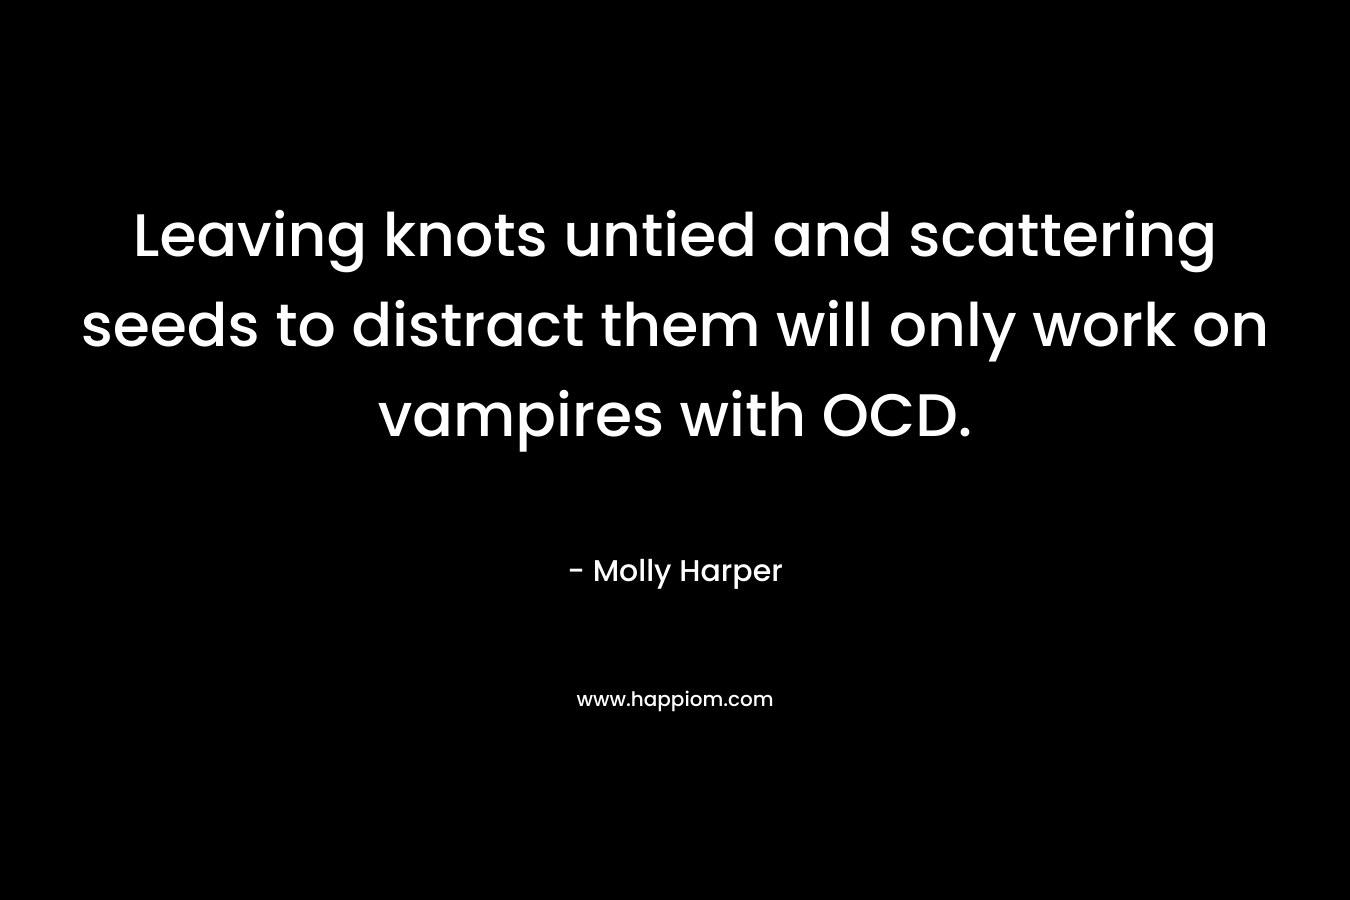 Leaving knots untied and scattering seeds to distract them will only work on vampires with OCD.